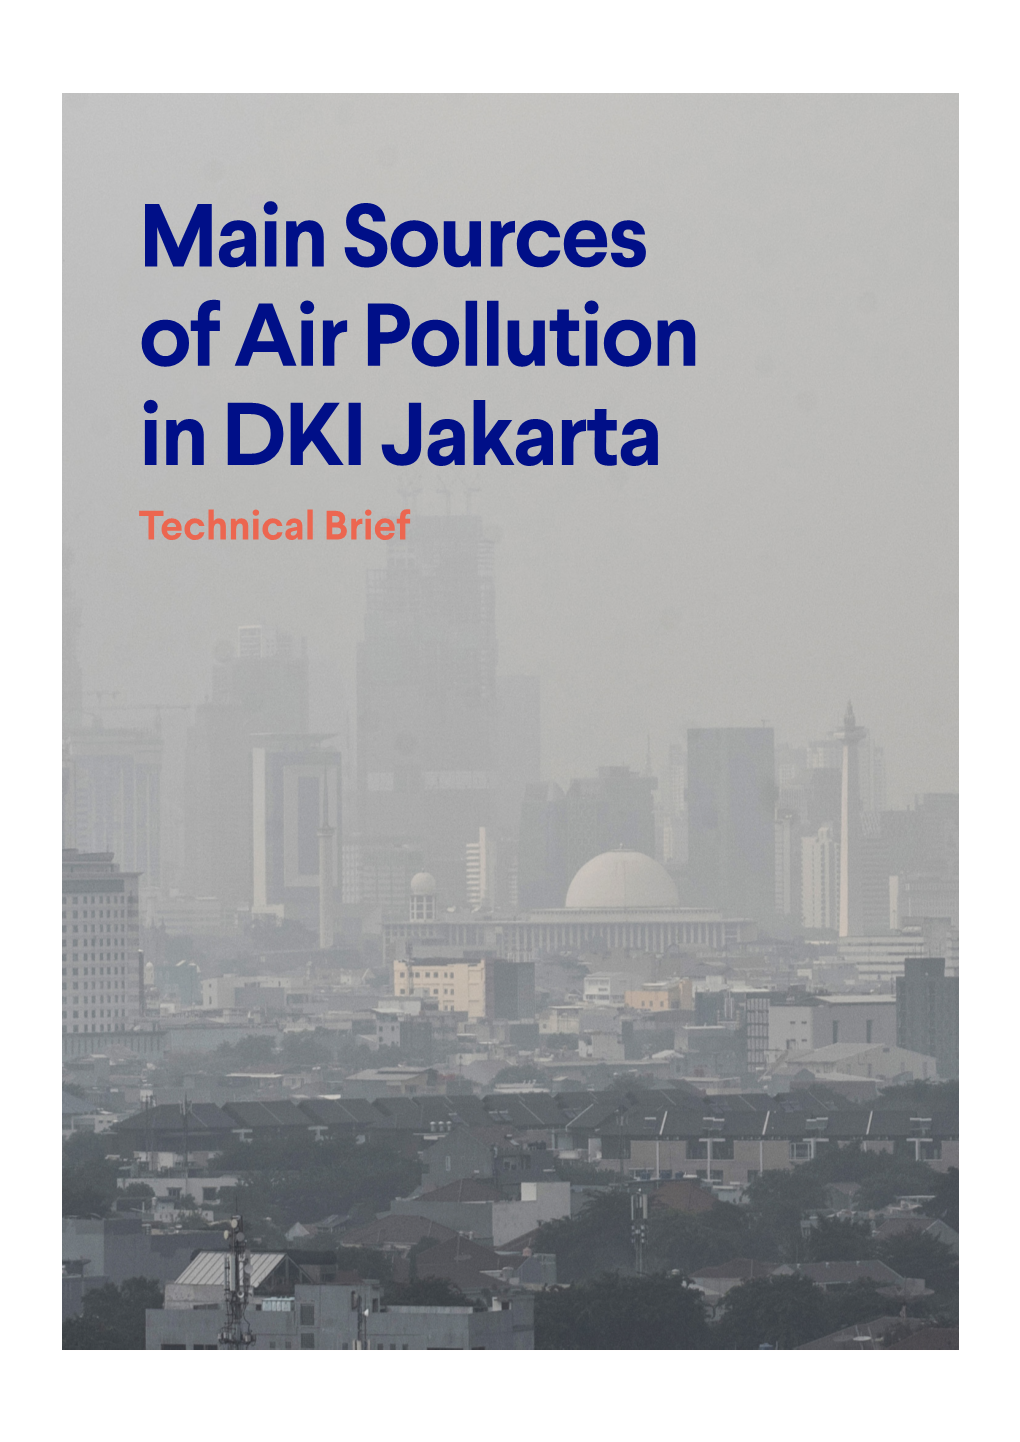 Sources of Air Pollution in DKI Jakarta Technical Brief Main Sources of Air Pollution in DKI Jakarta Technical Brief